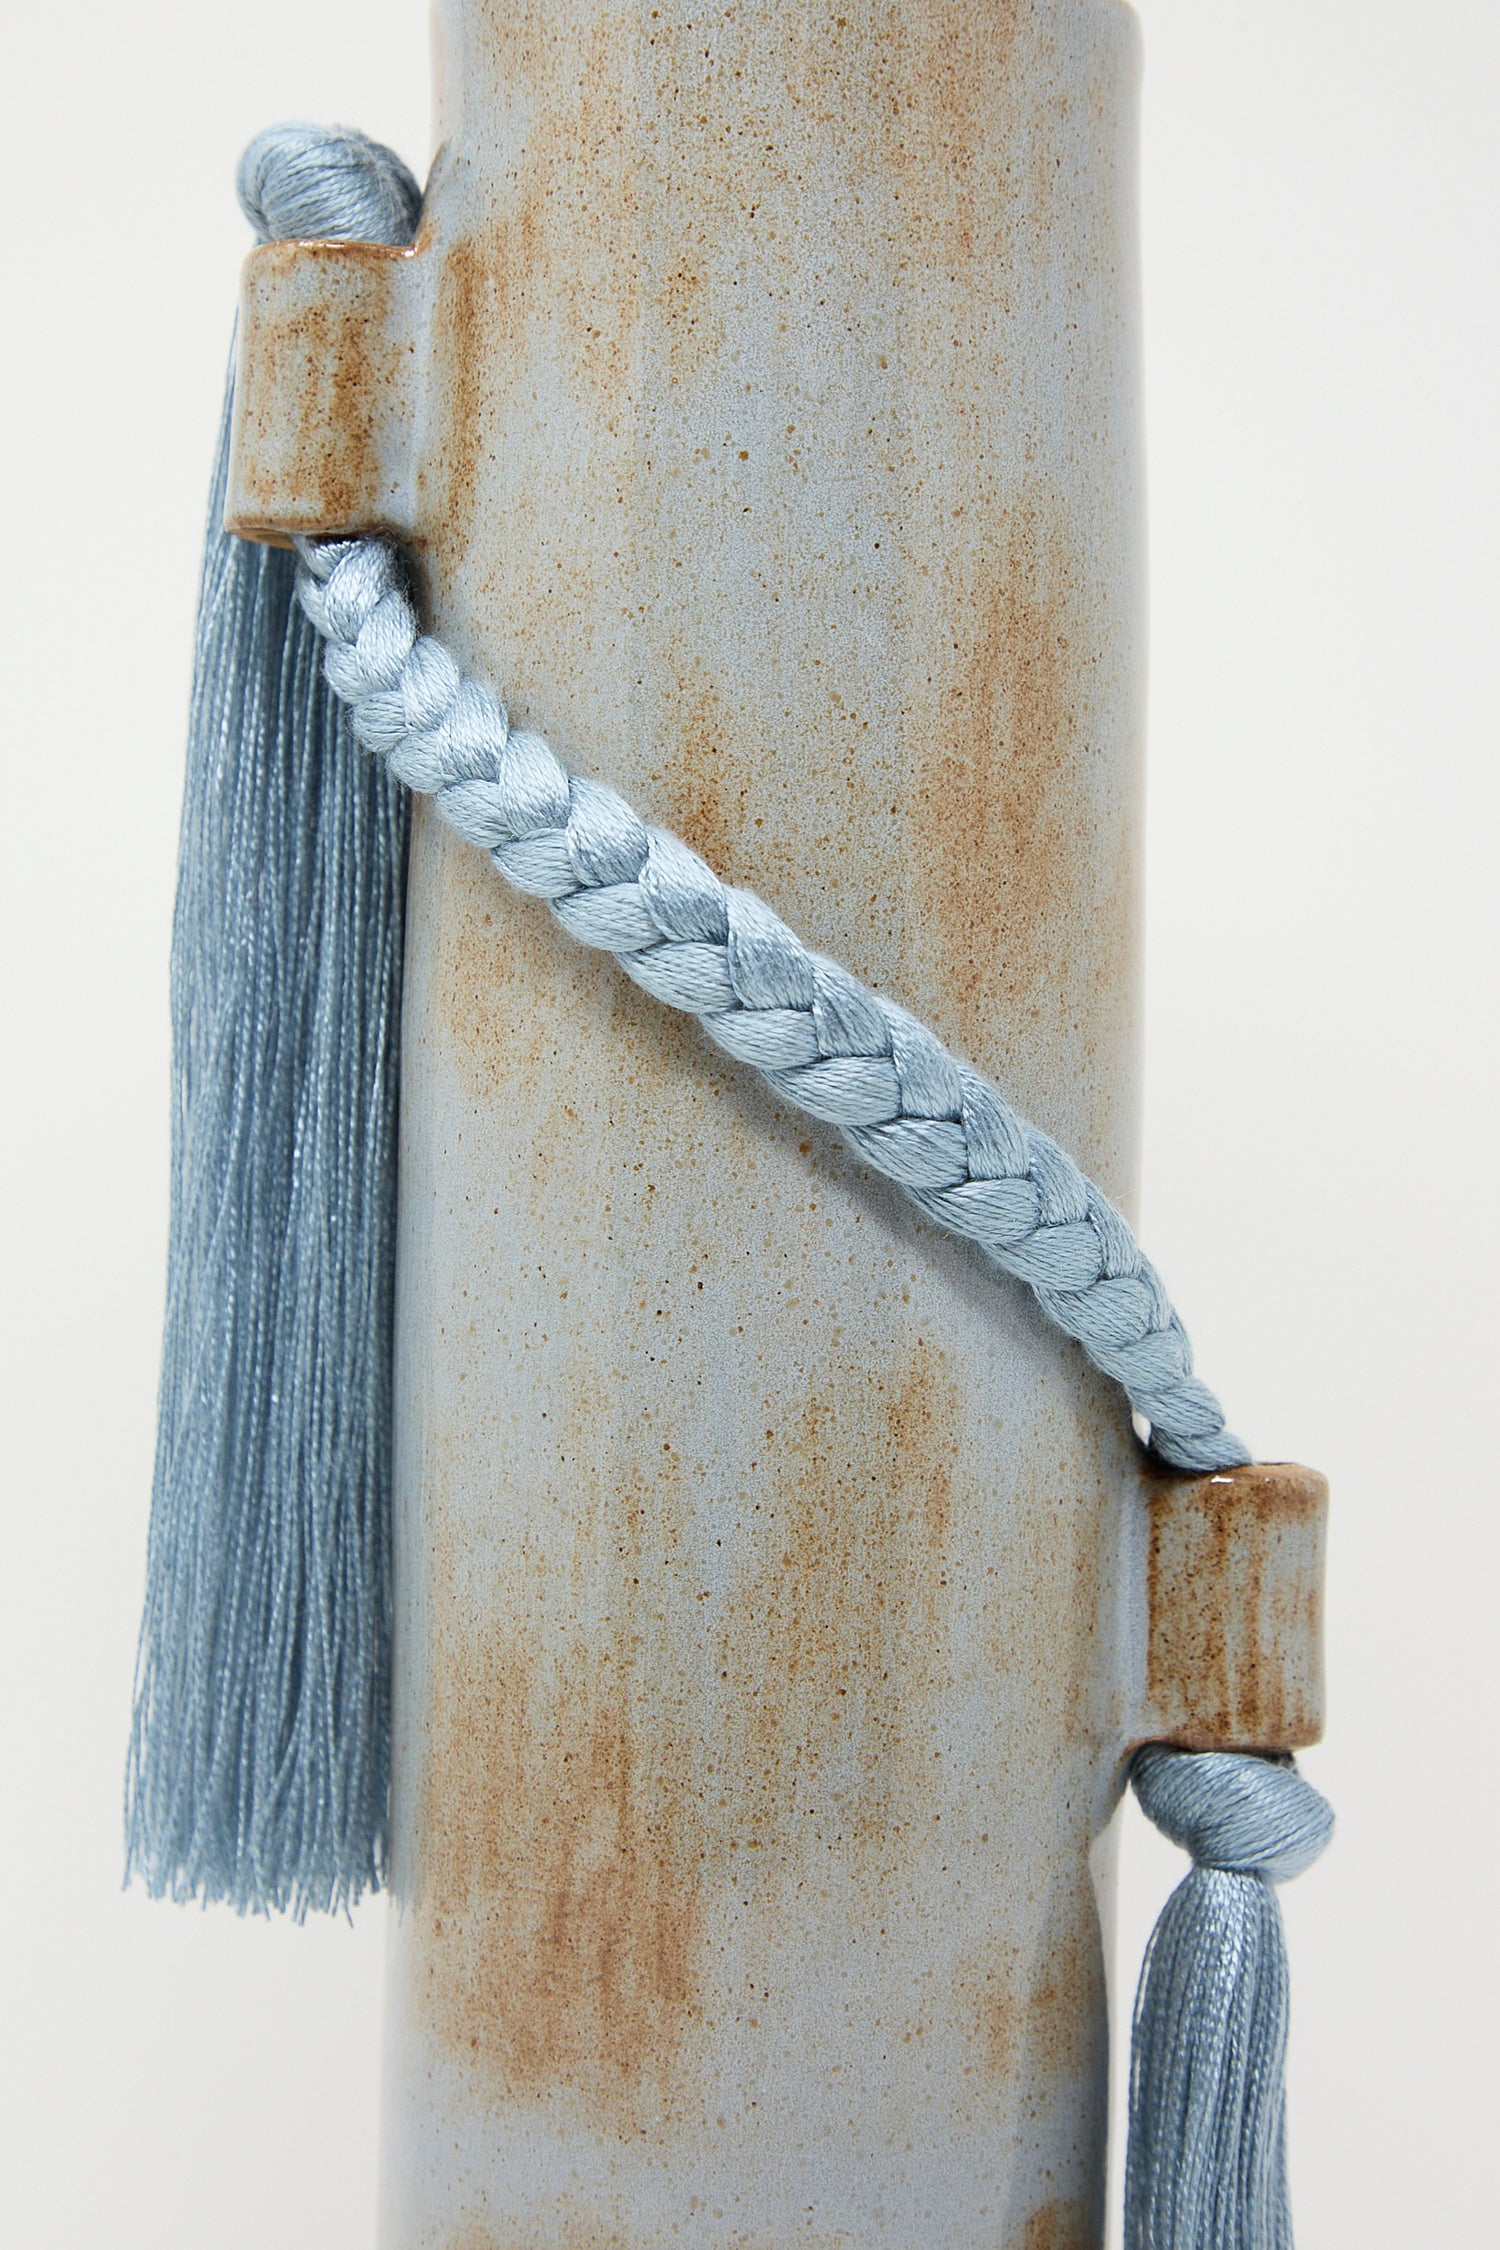 Blue tassel and cord wrapped around a weathered cylindrical Karen Tinney Vase #695 in Blue.